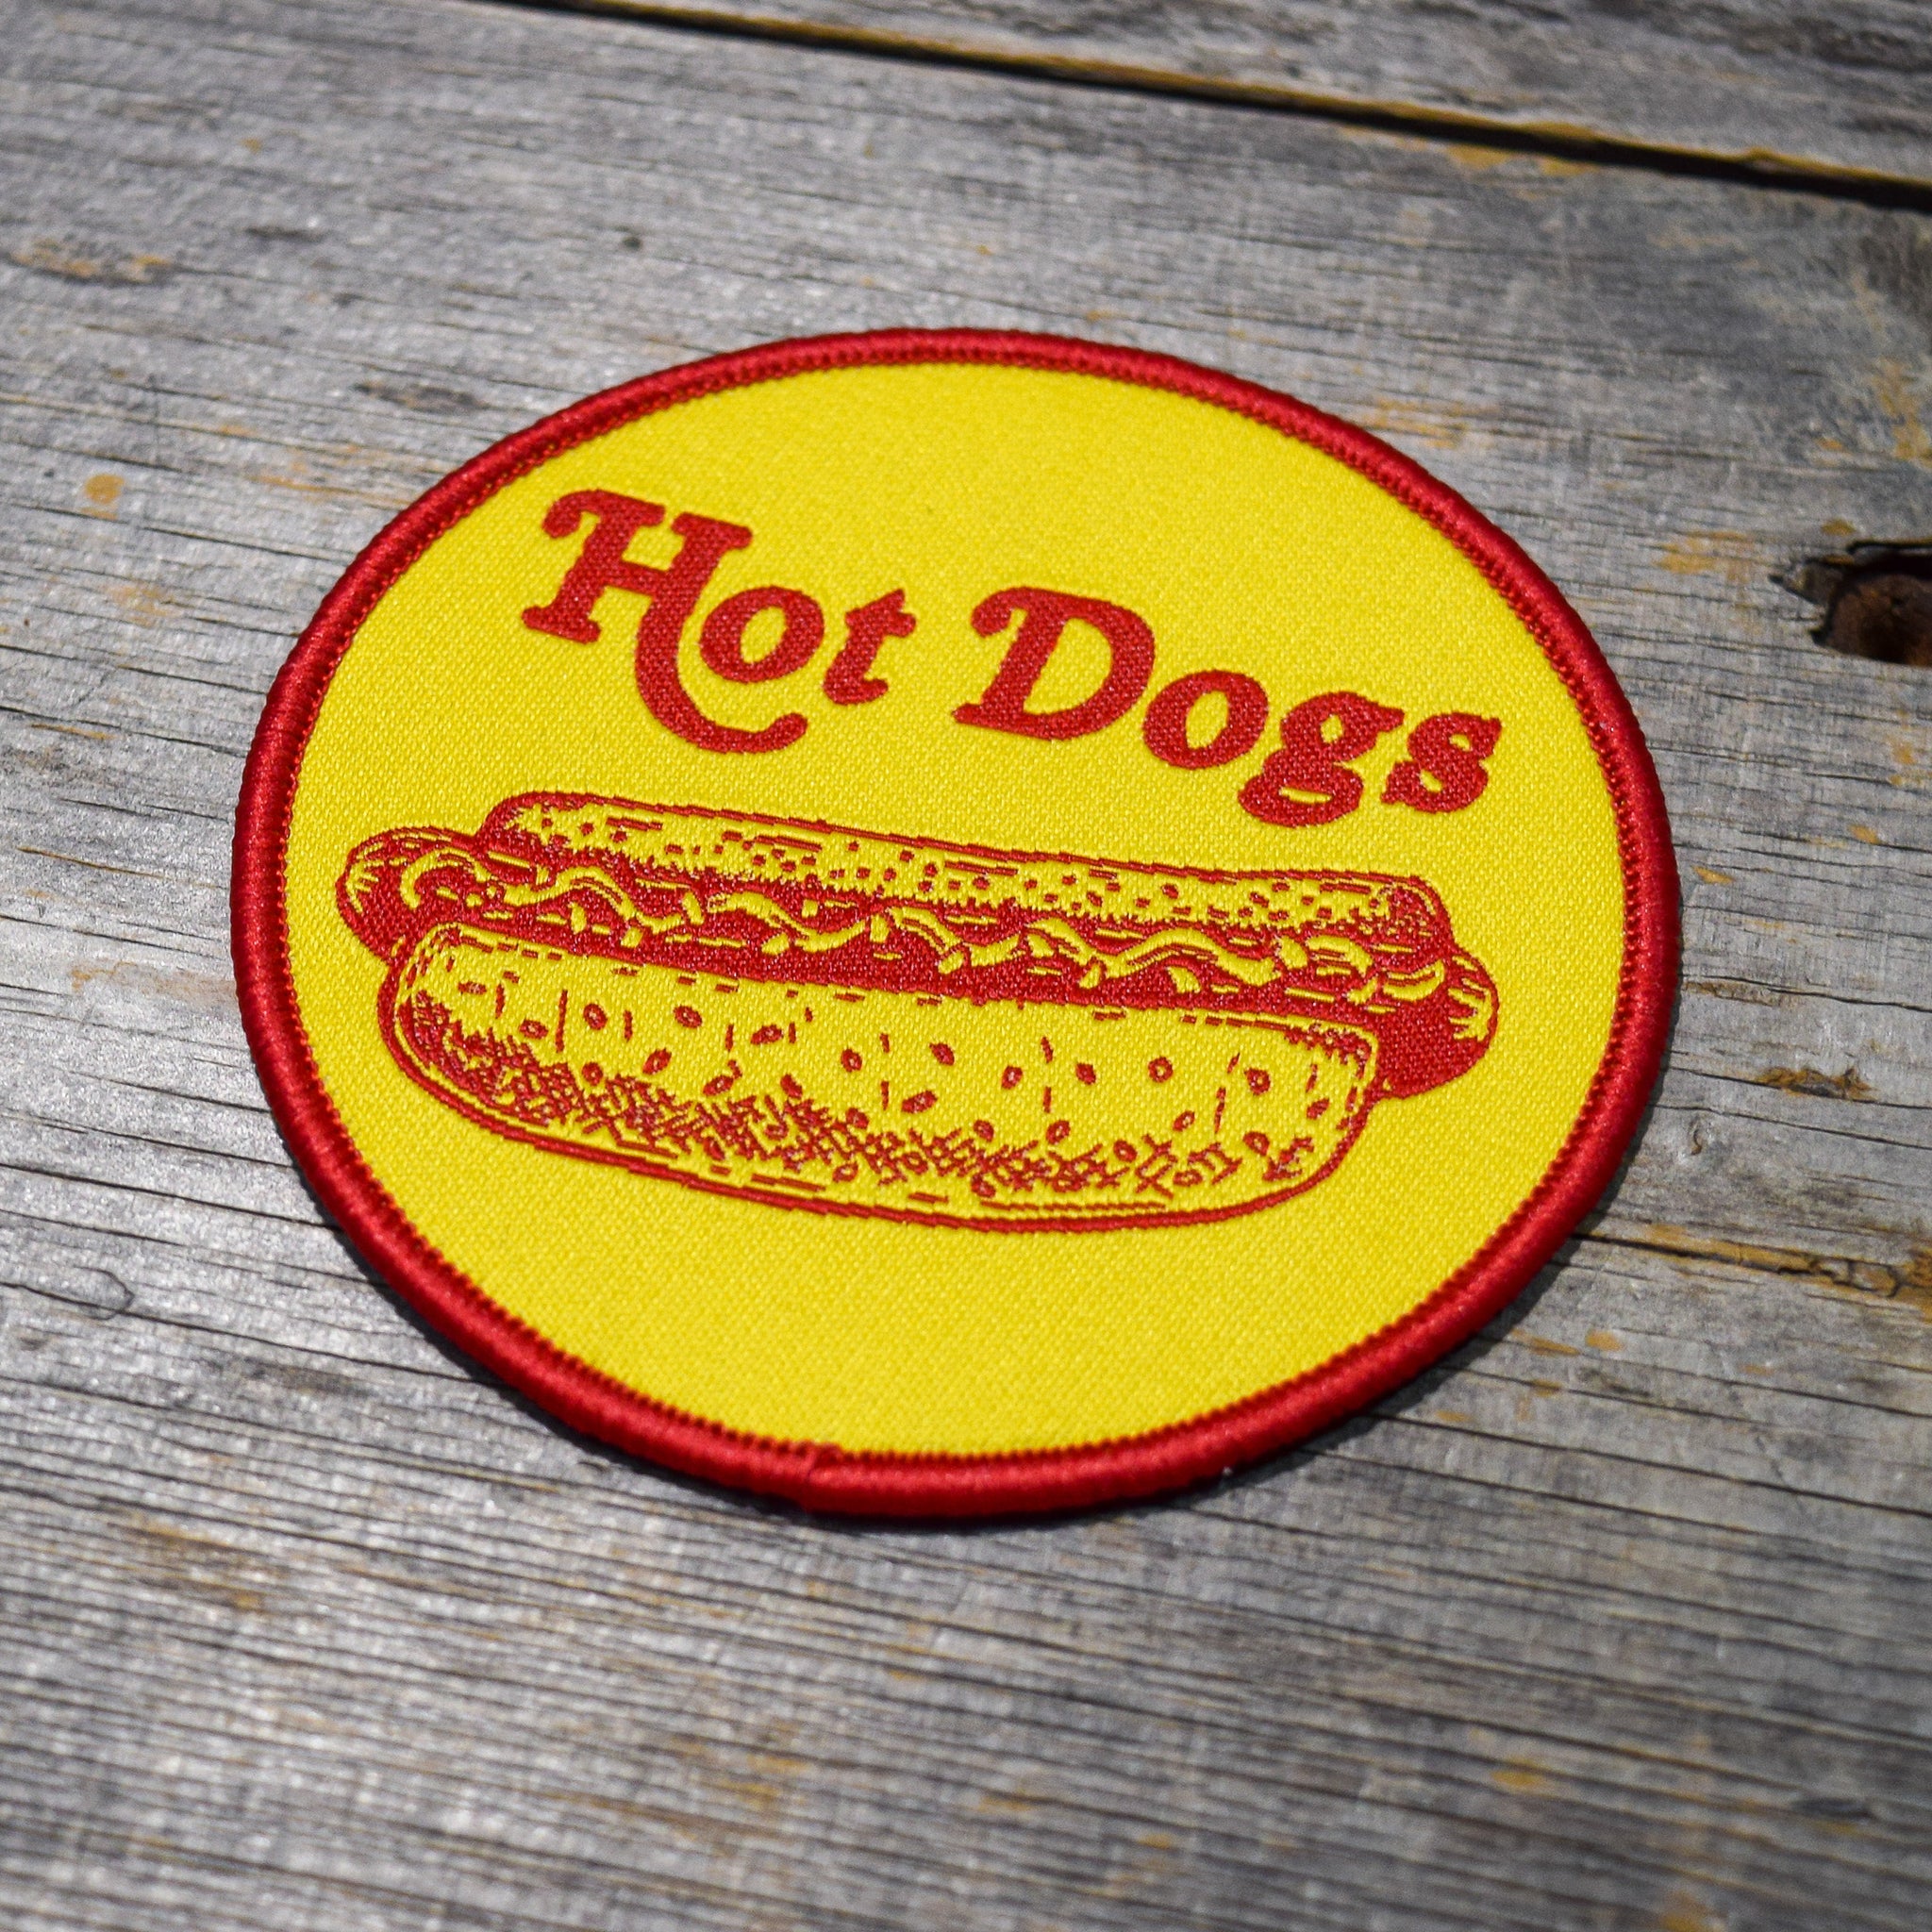 Hot Dogs Woven Patch